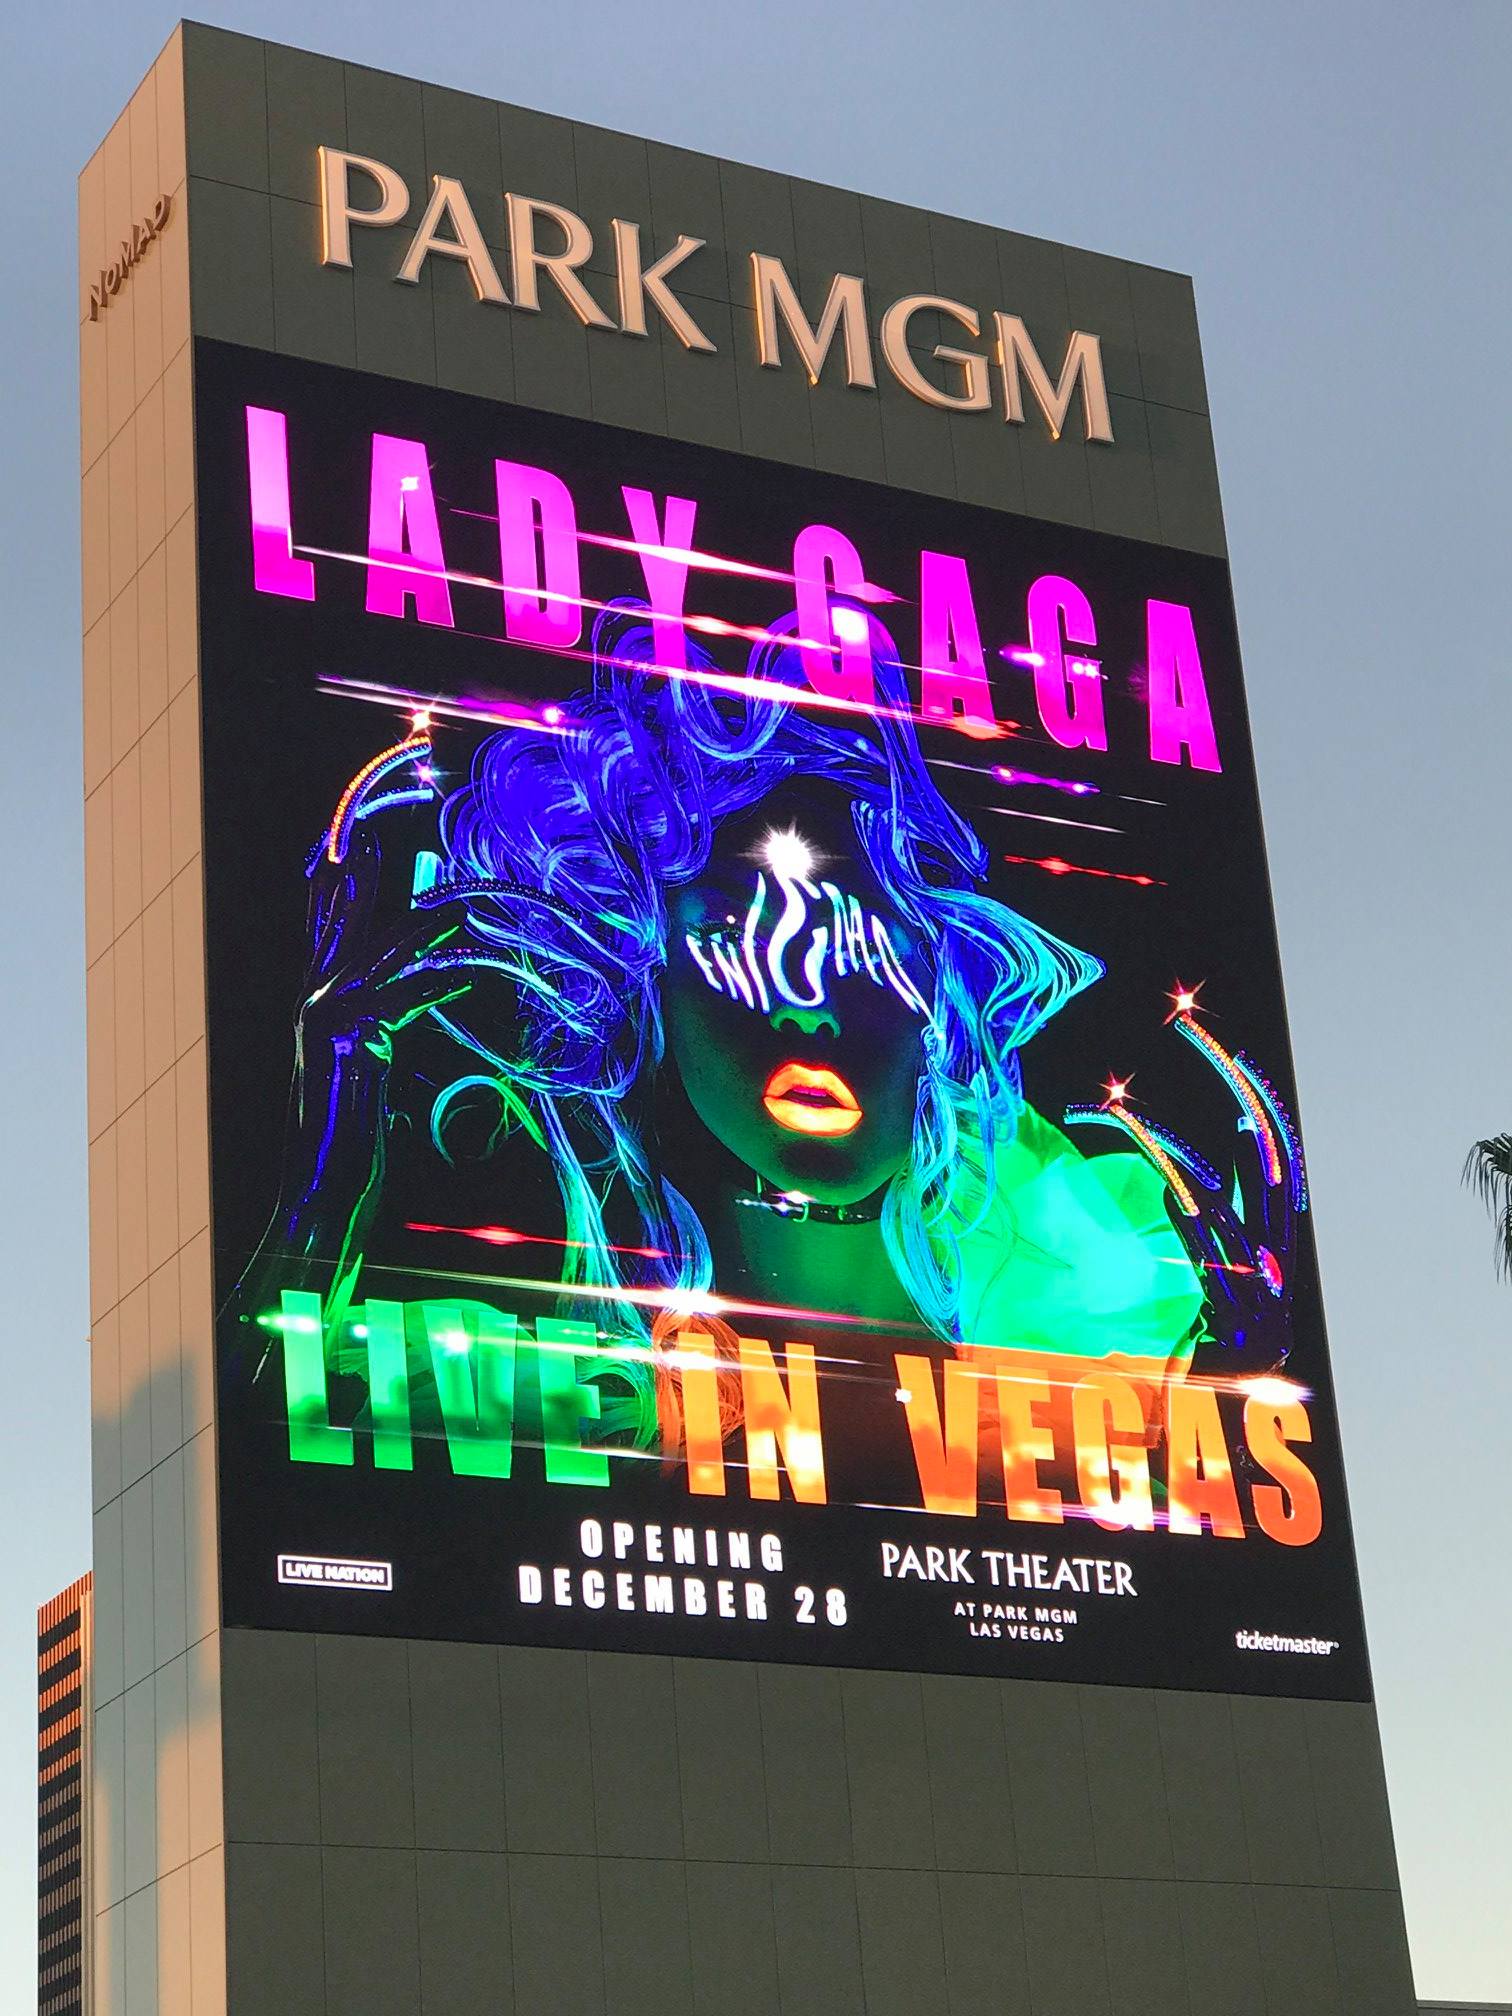 Photograph of Park MGM featuring Lady Gaga